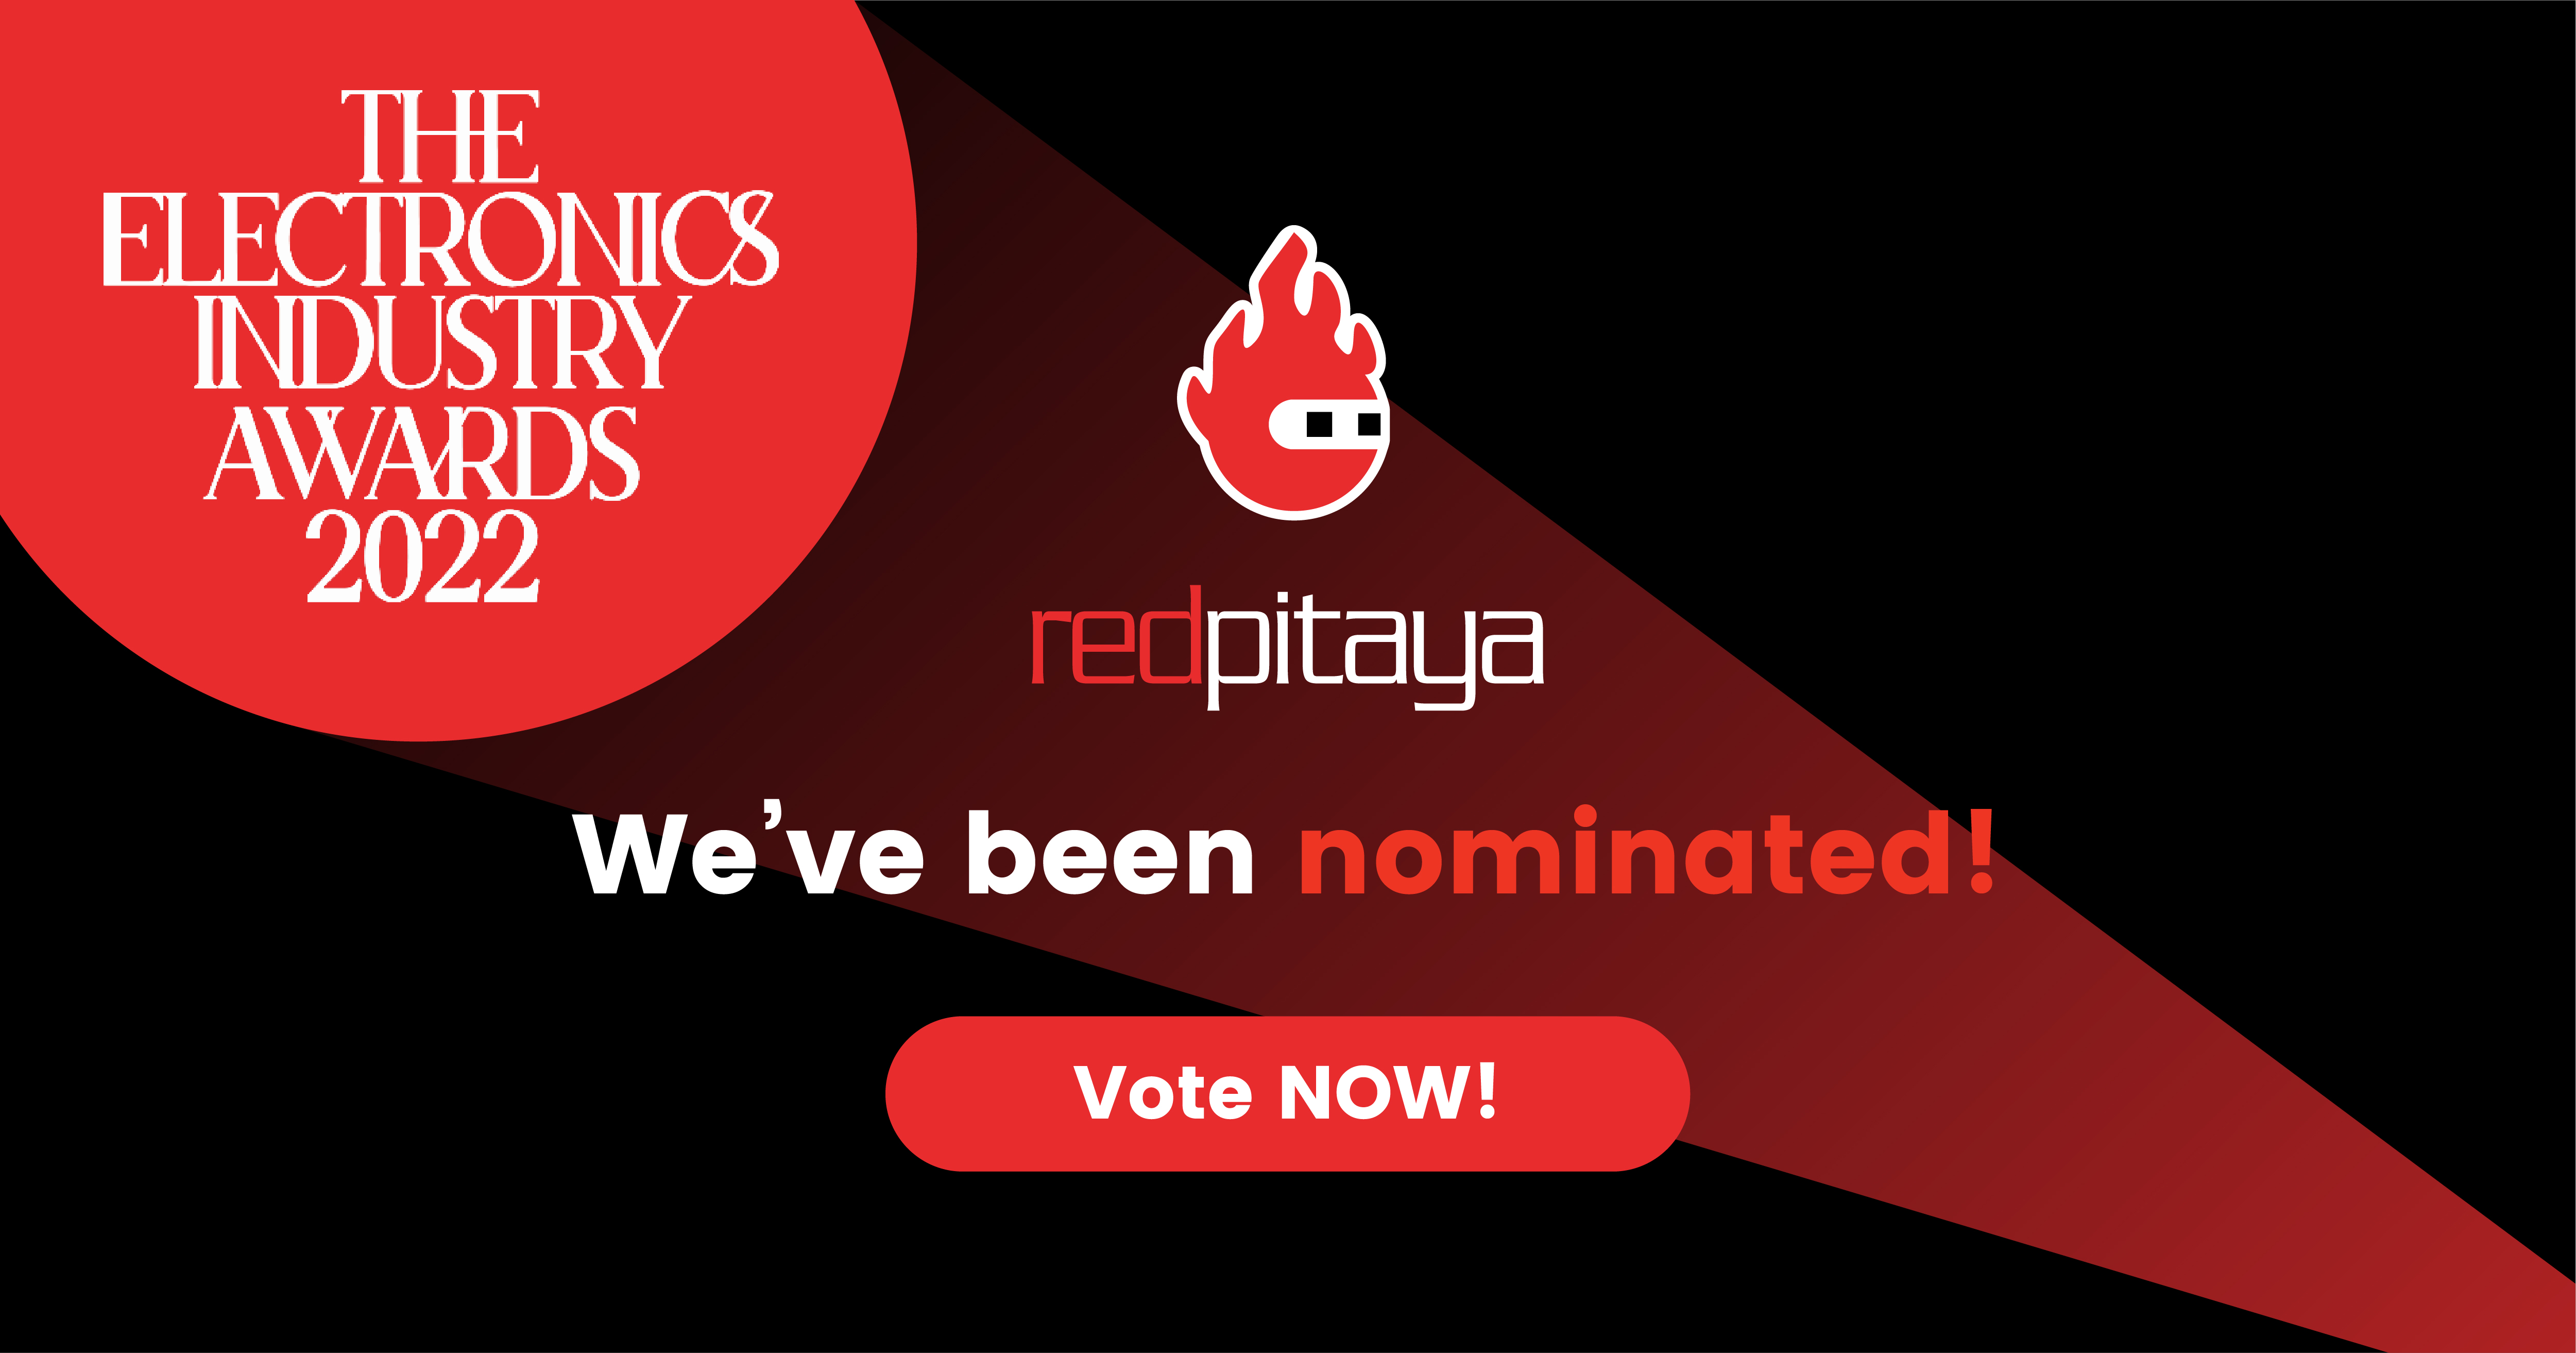 Red Pitaya is nominated for Electronics Industry Awards 2022